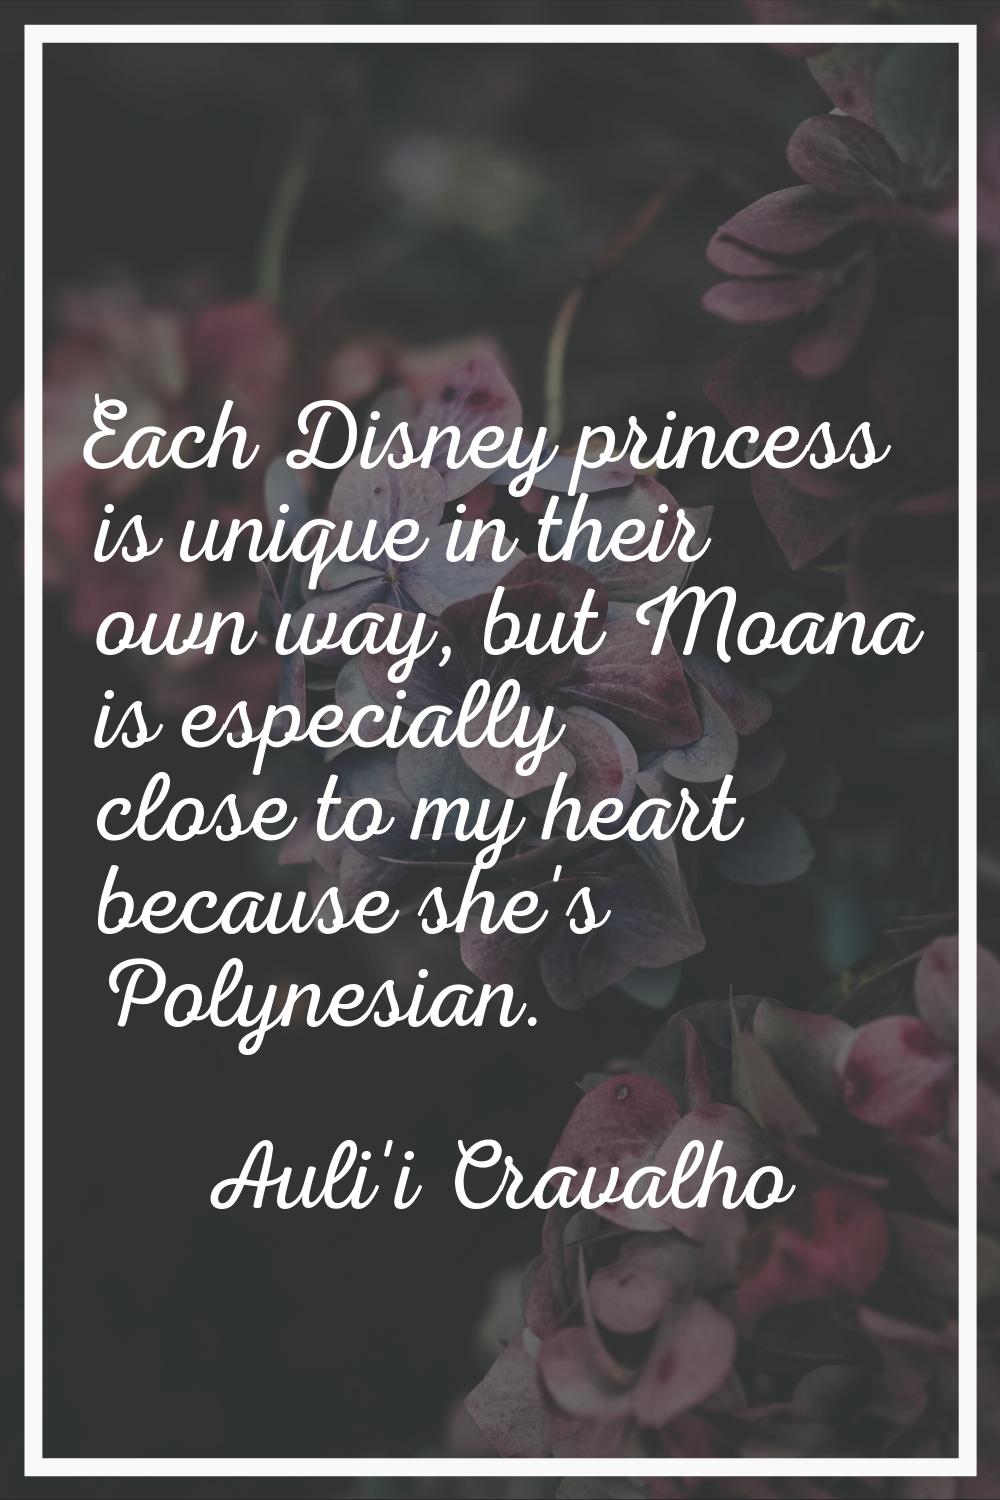 Each Disney princess is unique in their own way, but Moana is especially close to my heart because 